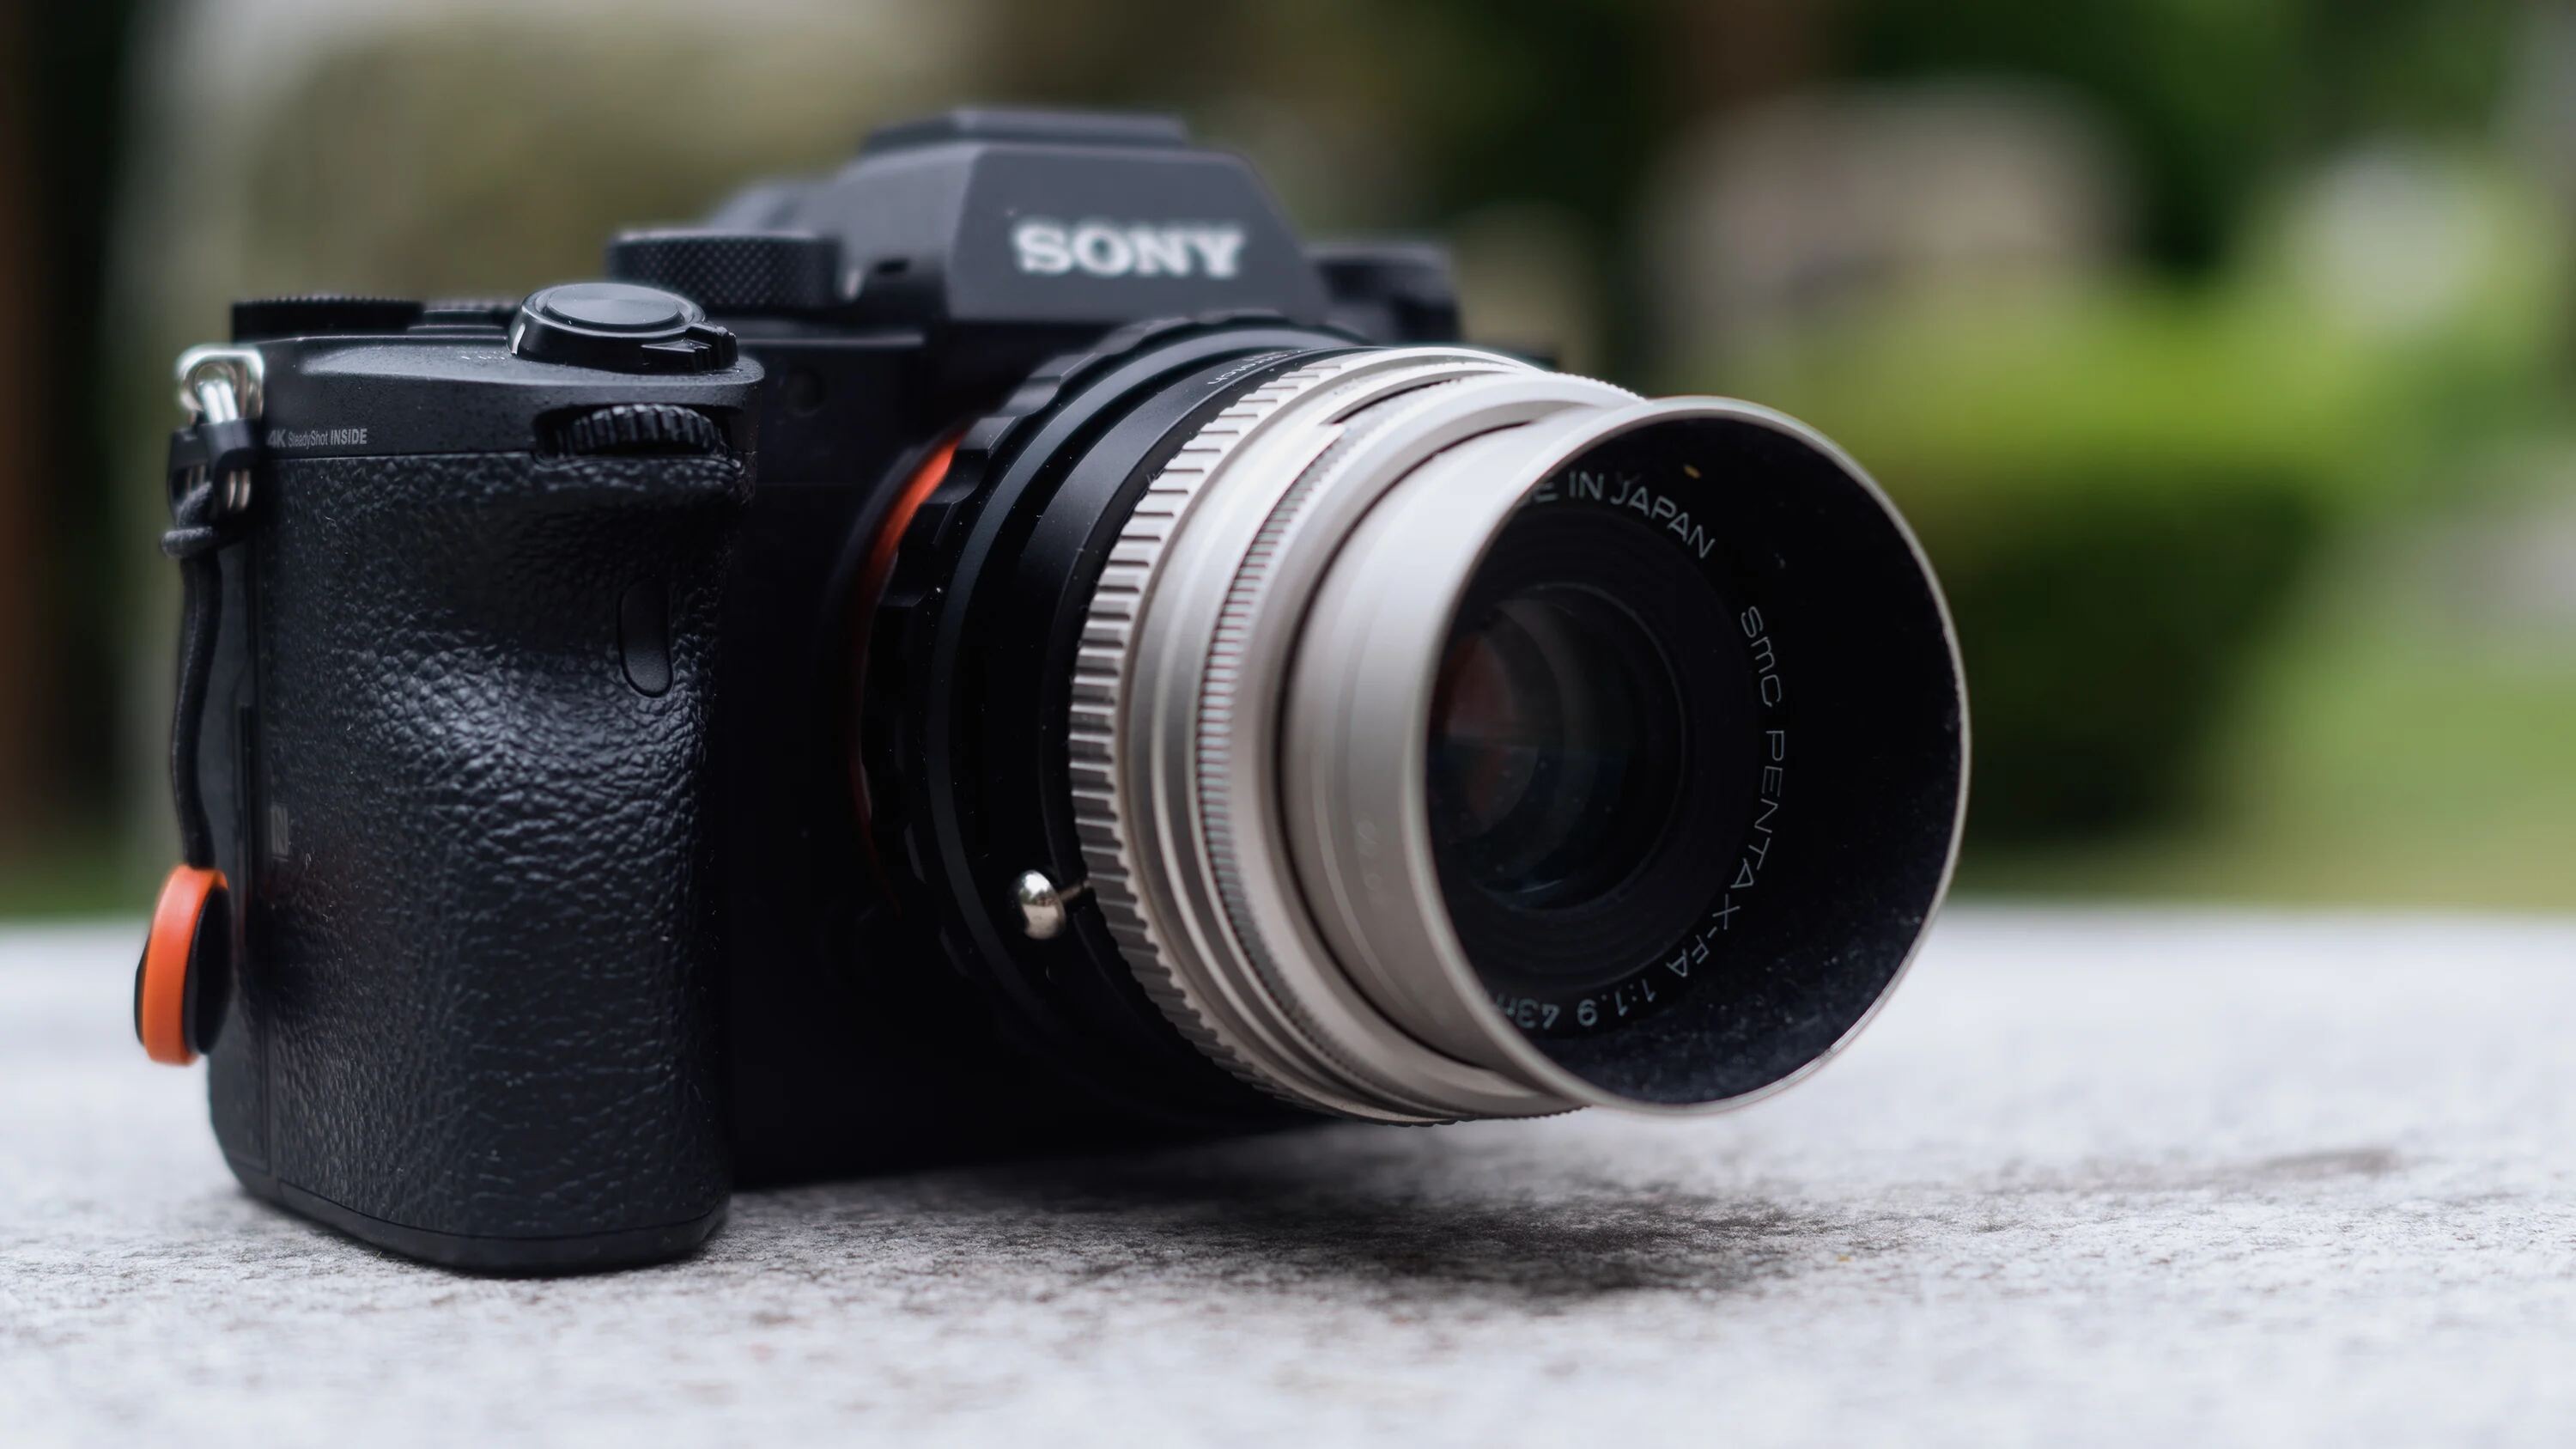 How To Protect Your New Mirrorless Camera